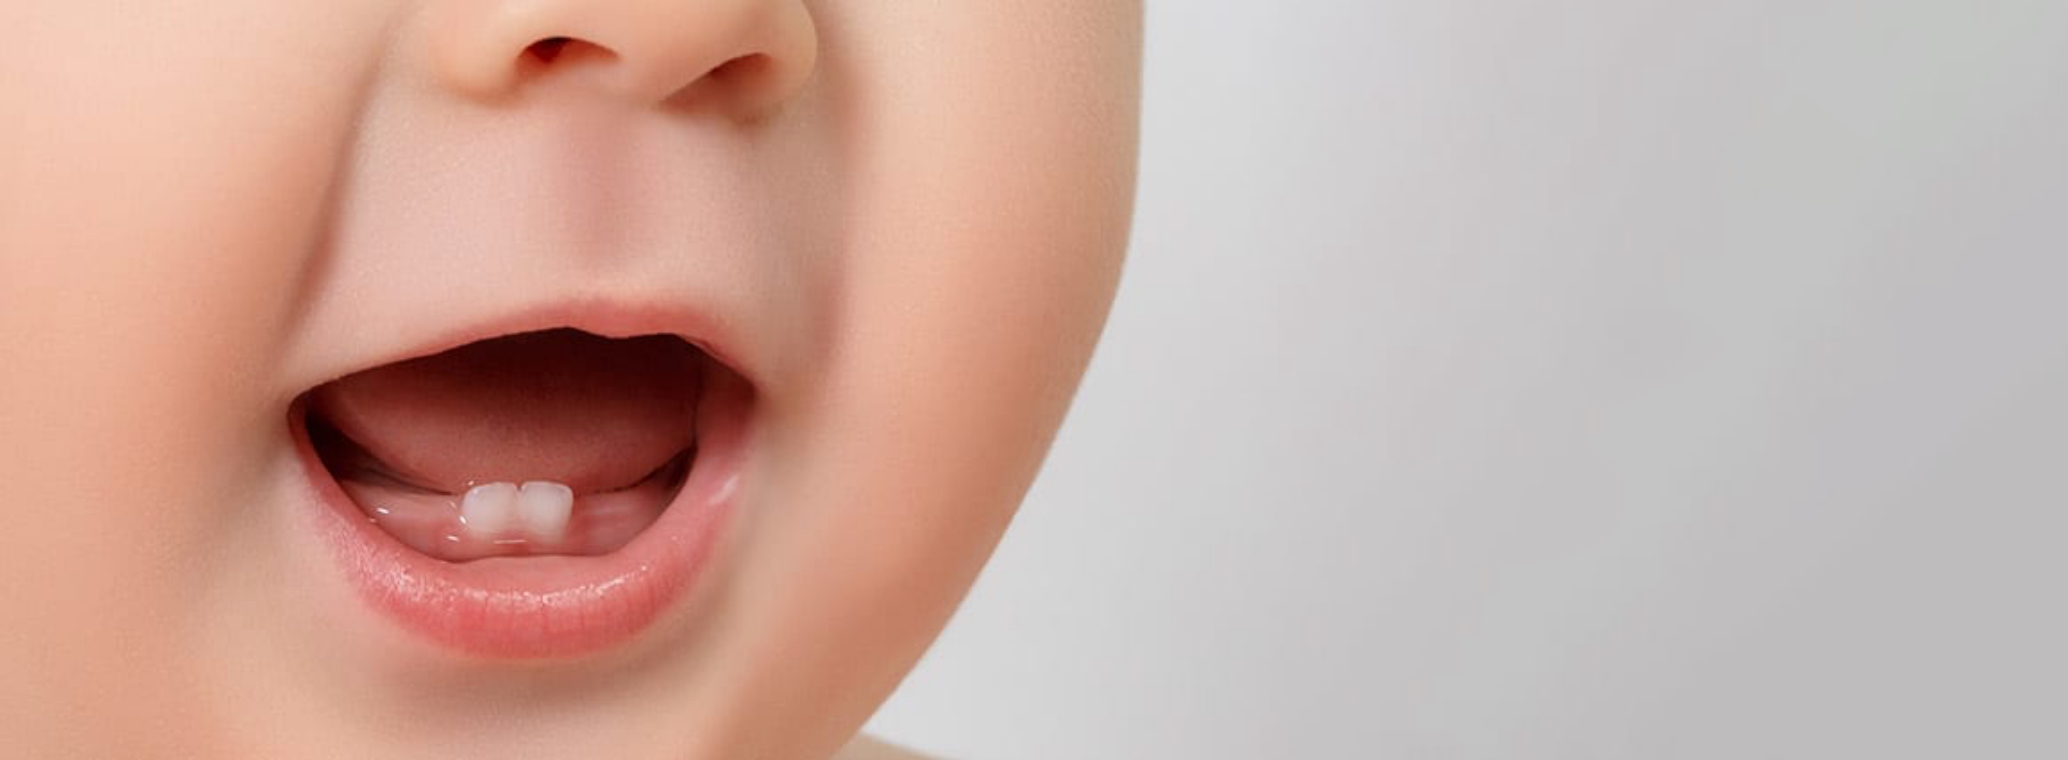 White or Brown Spots on Baby Teeth